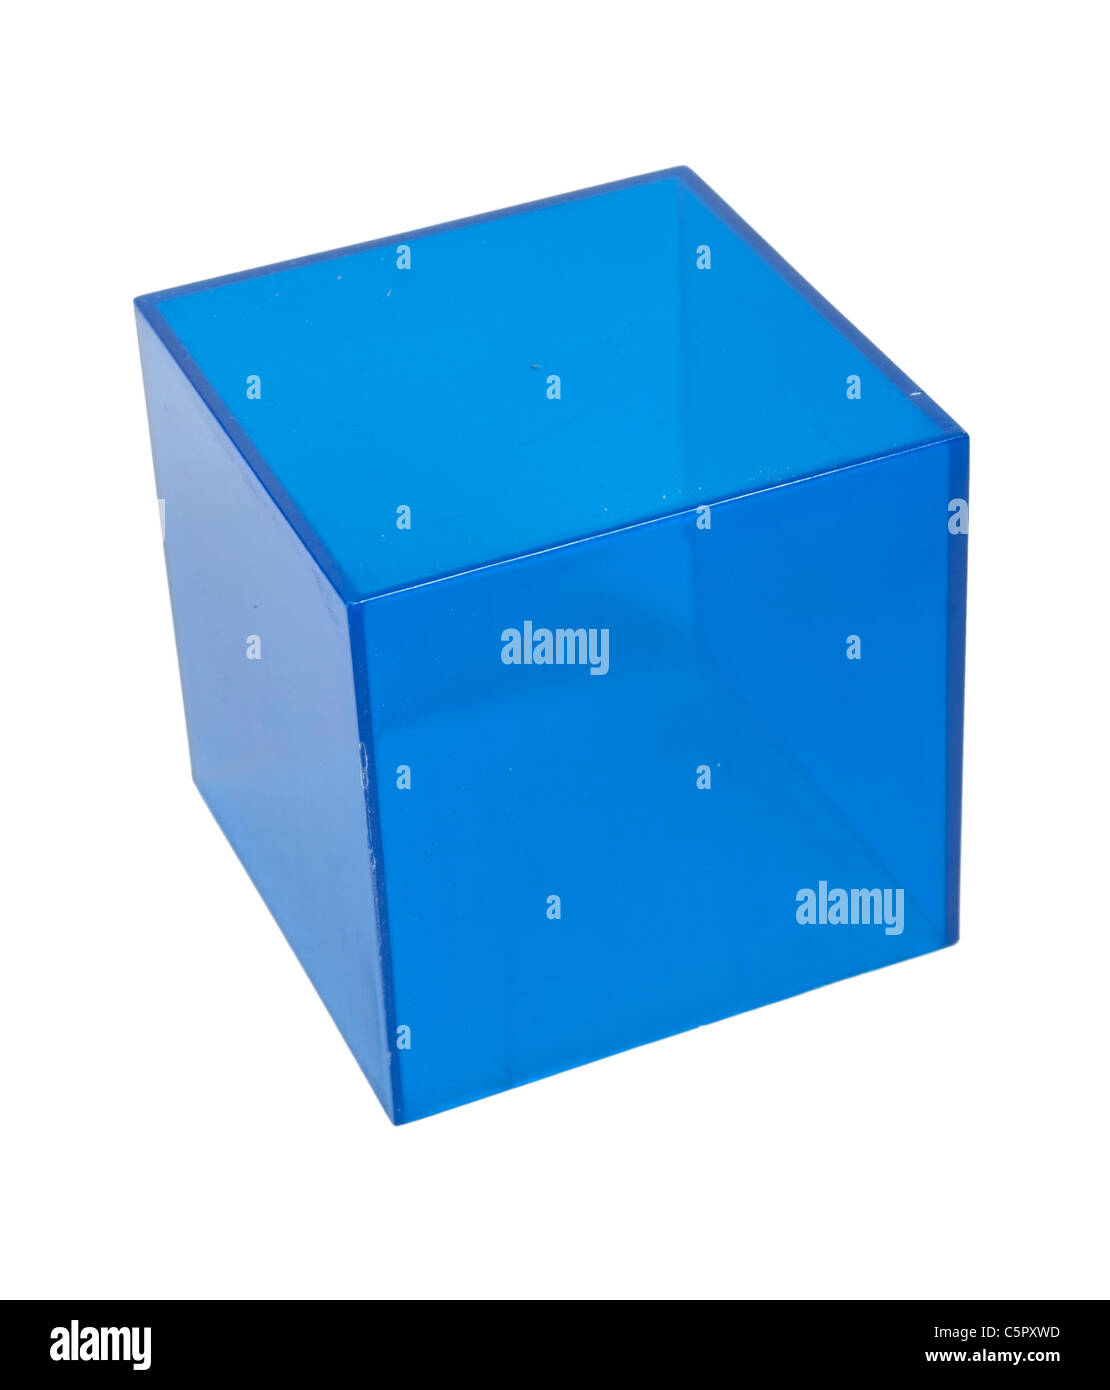 Blue Cube geometric shape used for educational purposes - path included Stock Photo